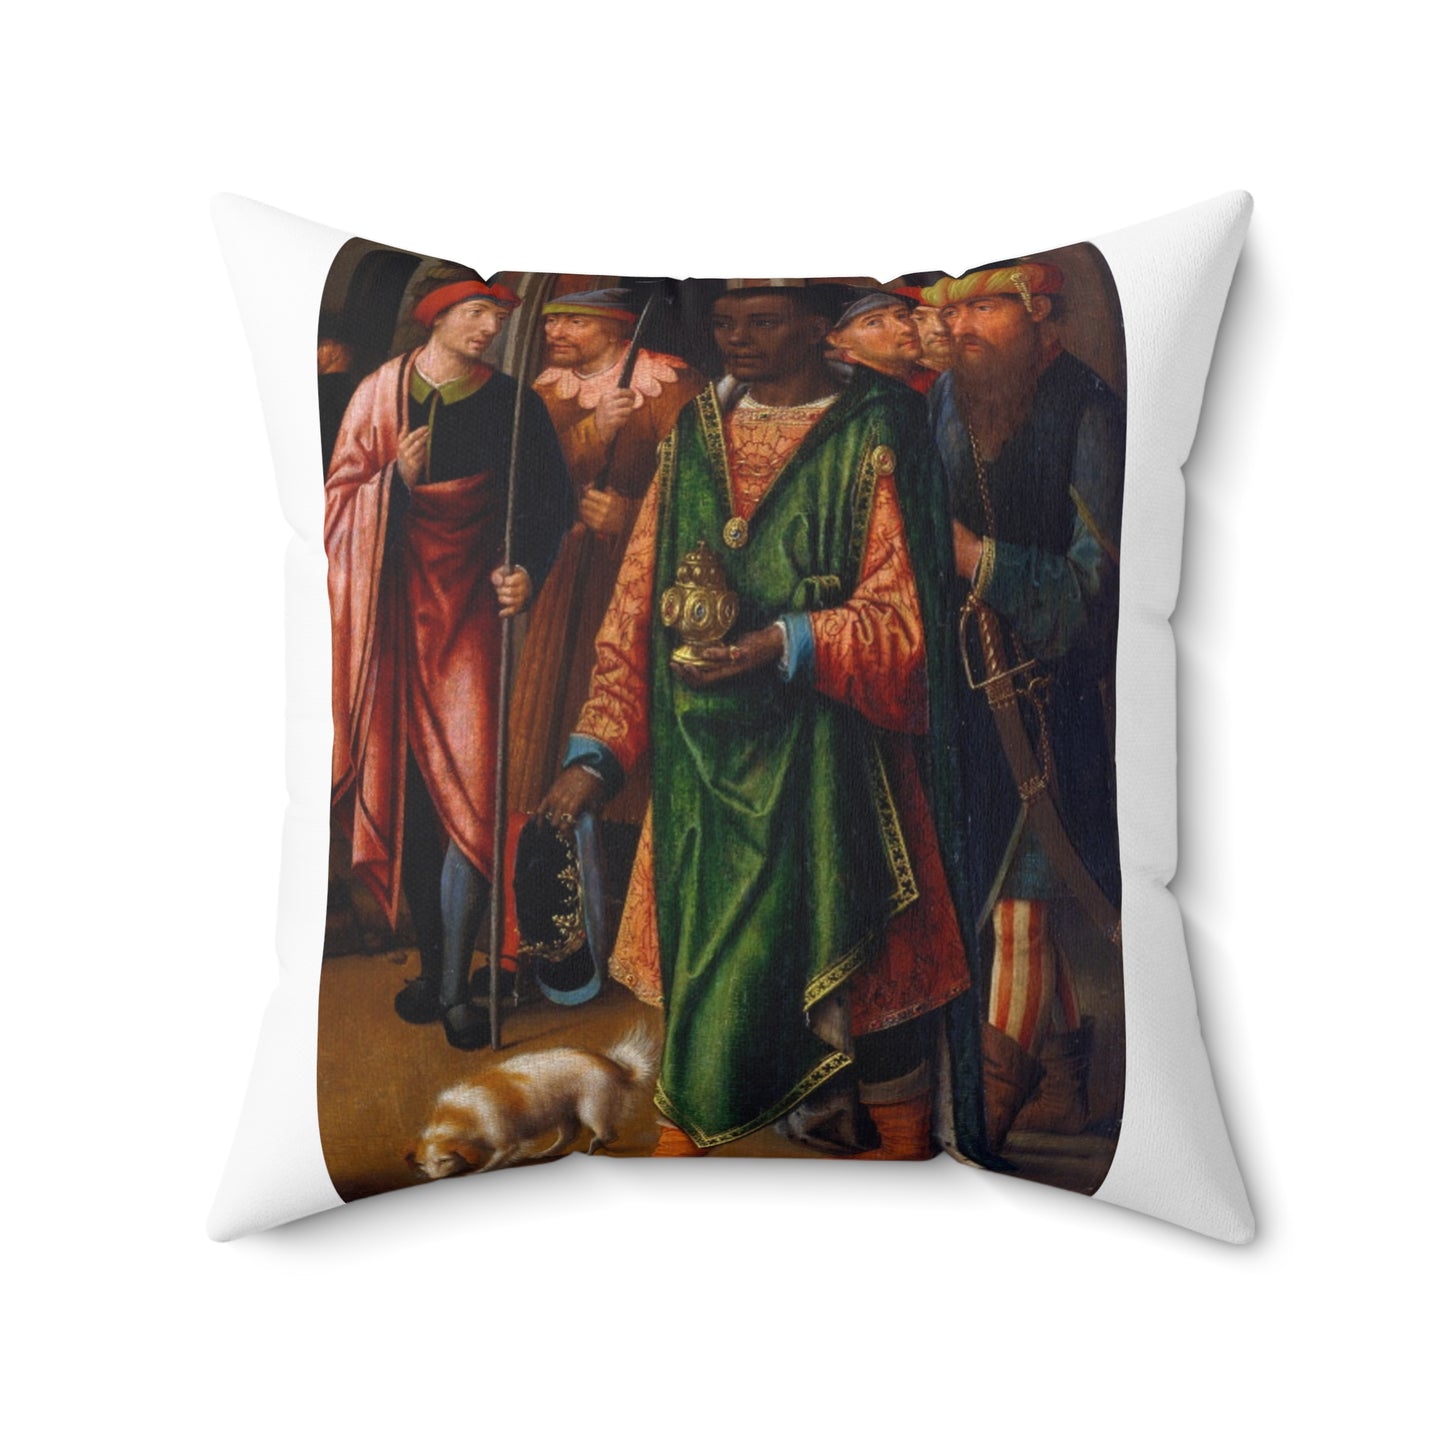 The Adoration Of The Magi- Square Pillow